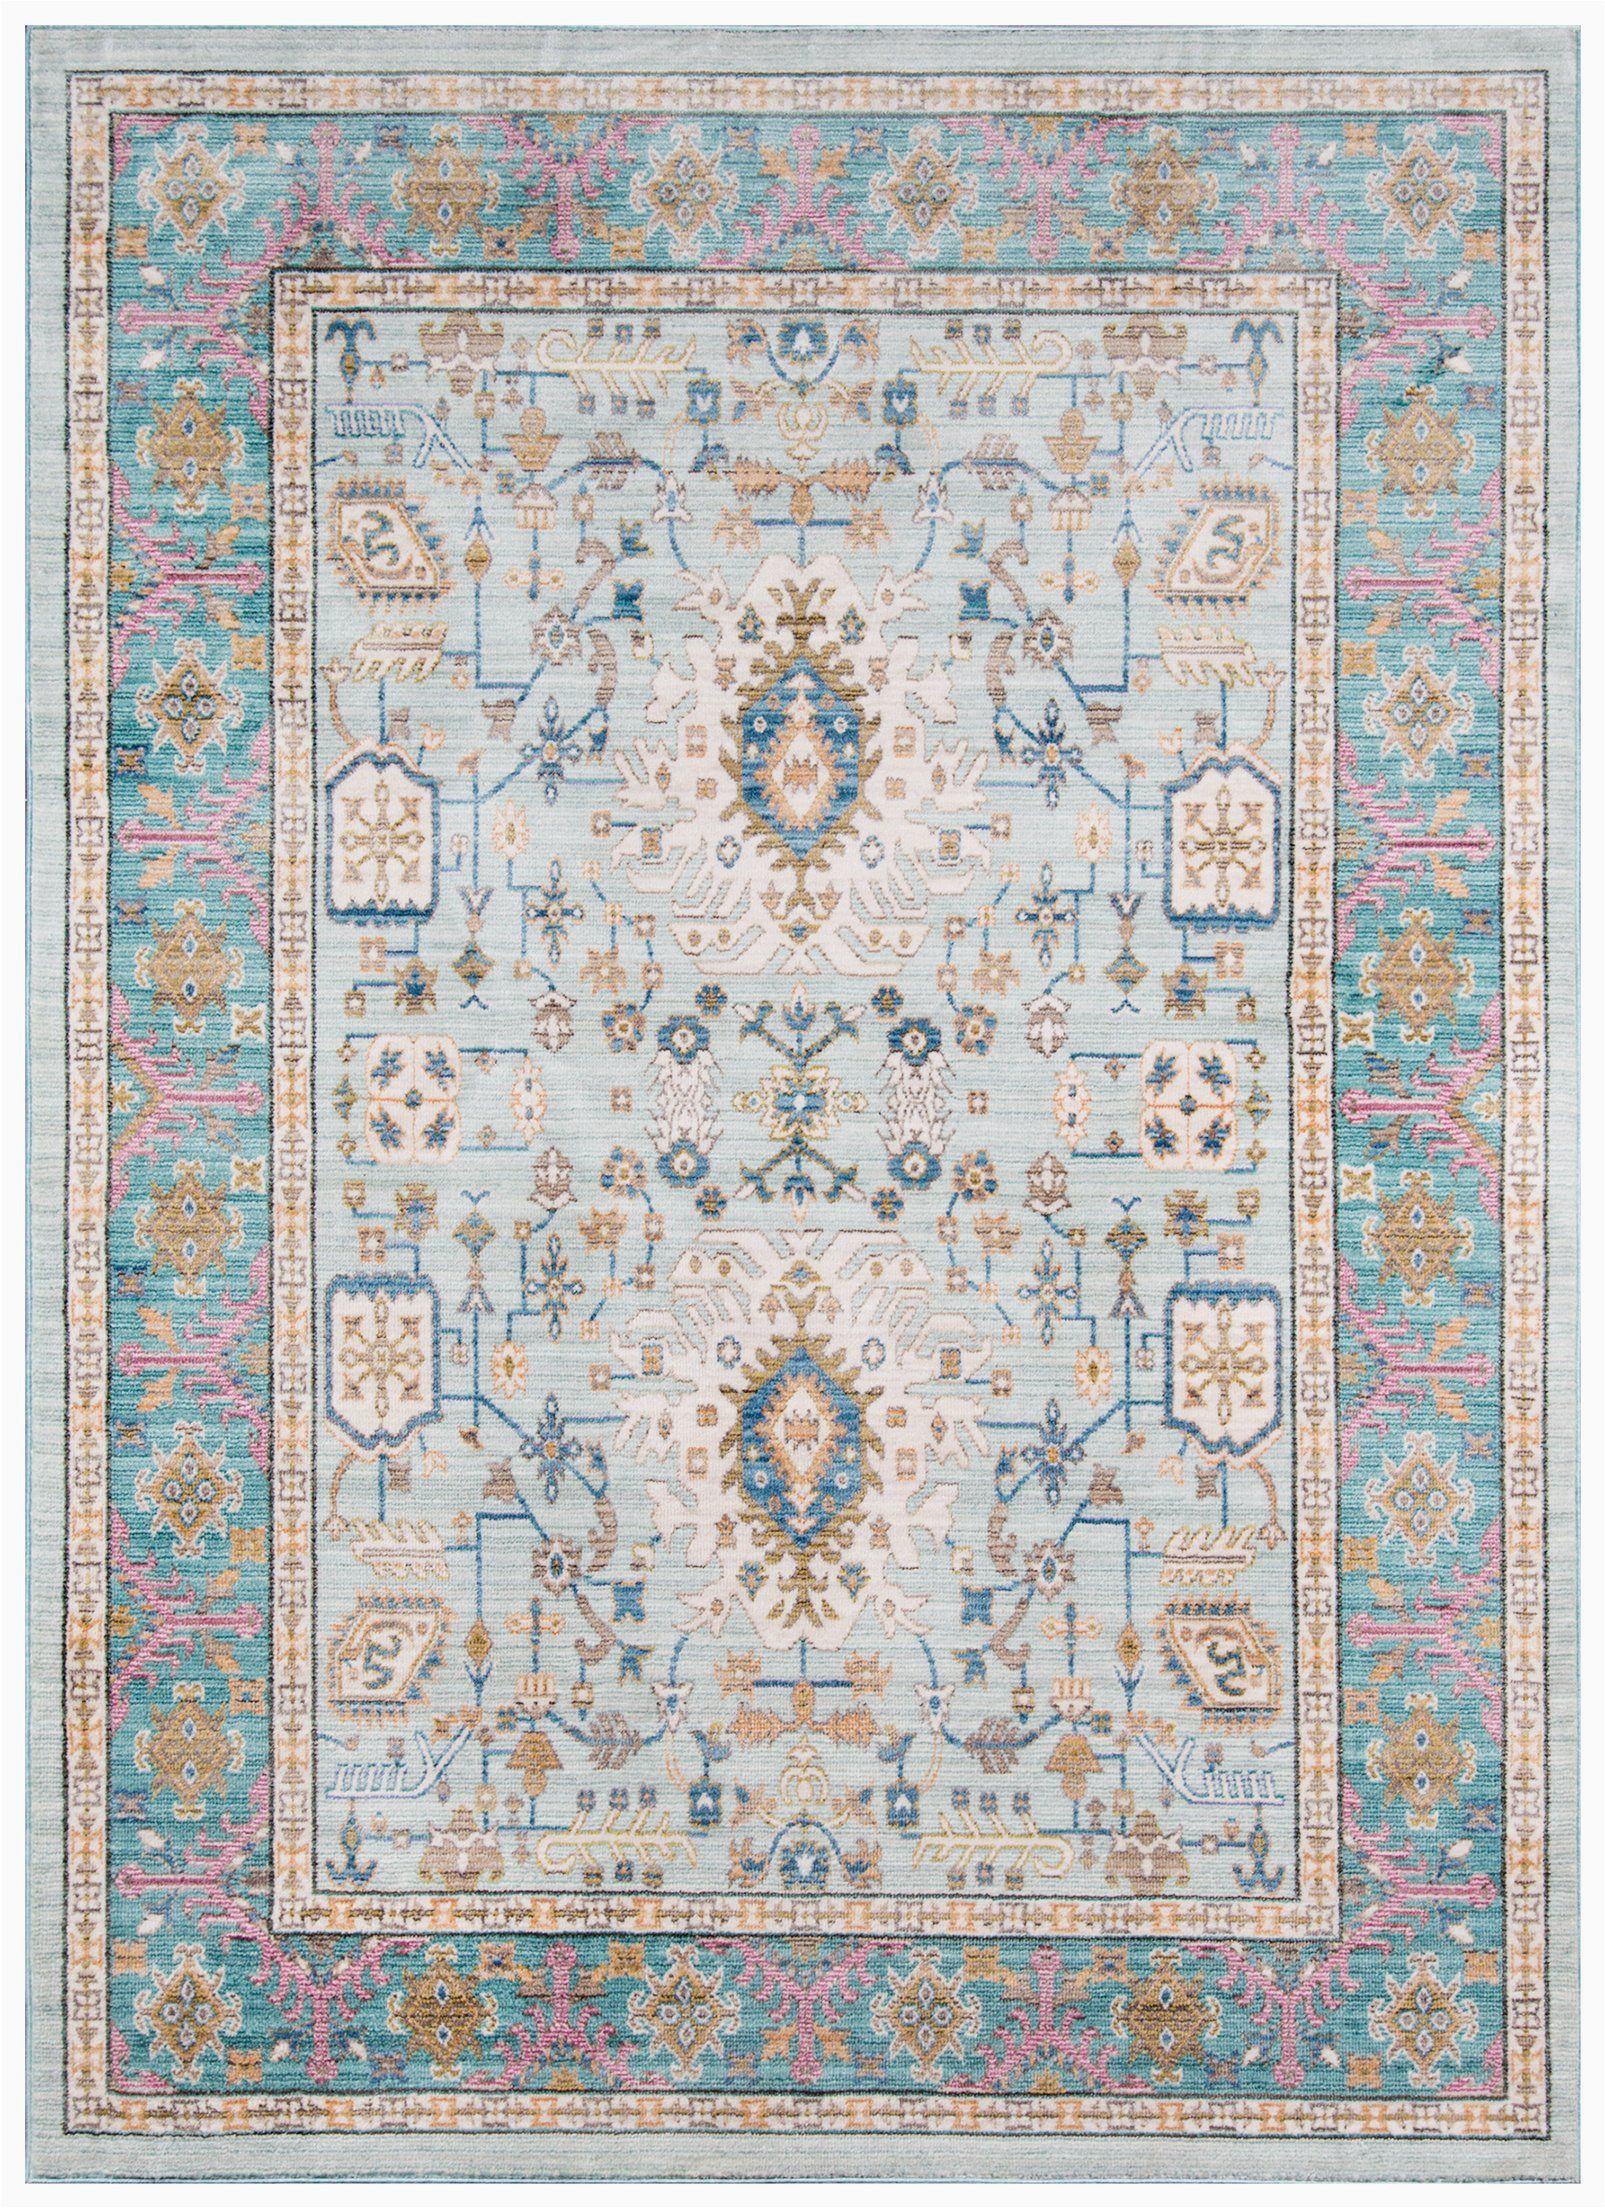 Light Blue and Pink area Rug Shabby Chic Teal Blue Pink area Rug